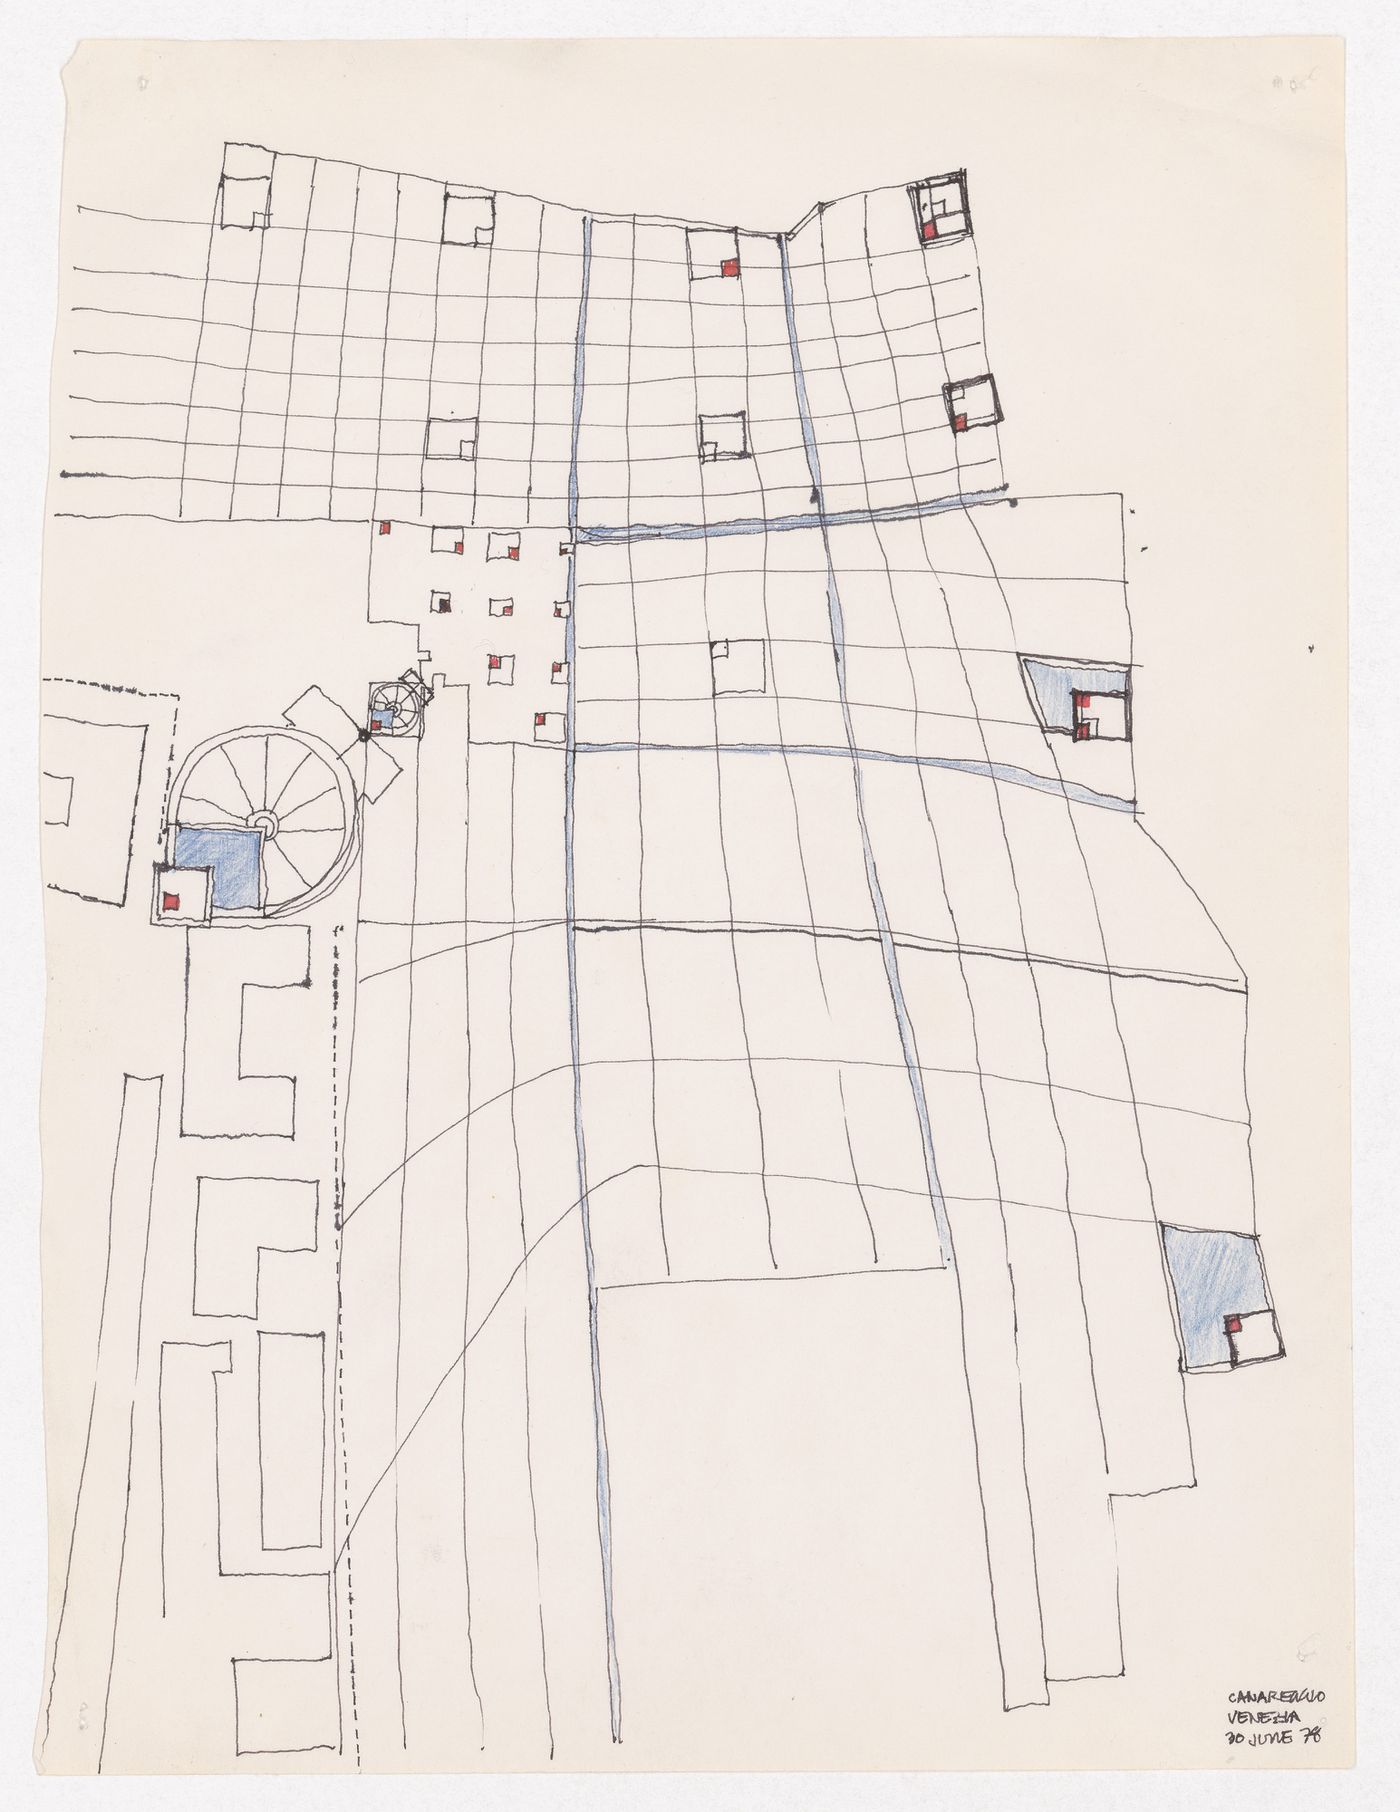 Sketch site plan with plan of S. Simeone Piccolo church at two different scales and deformed grid of houses for International Seminary of Design in the Area of Cannaregio-West, Venice, Italy